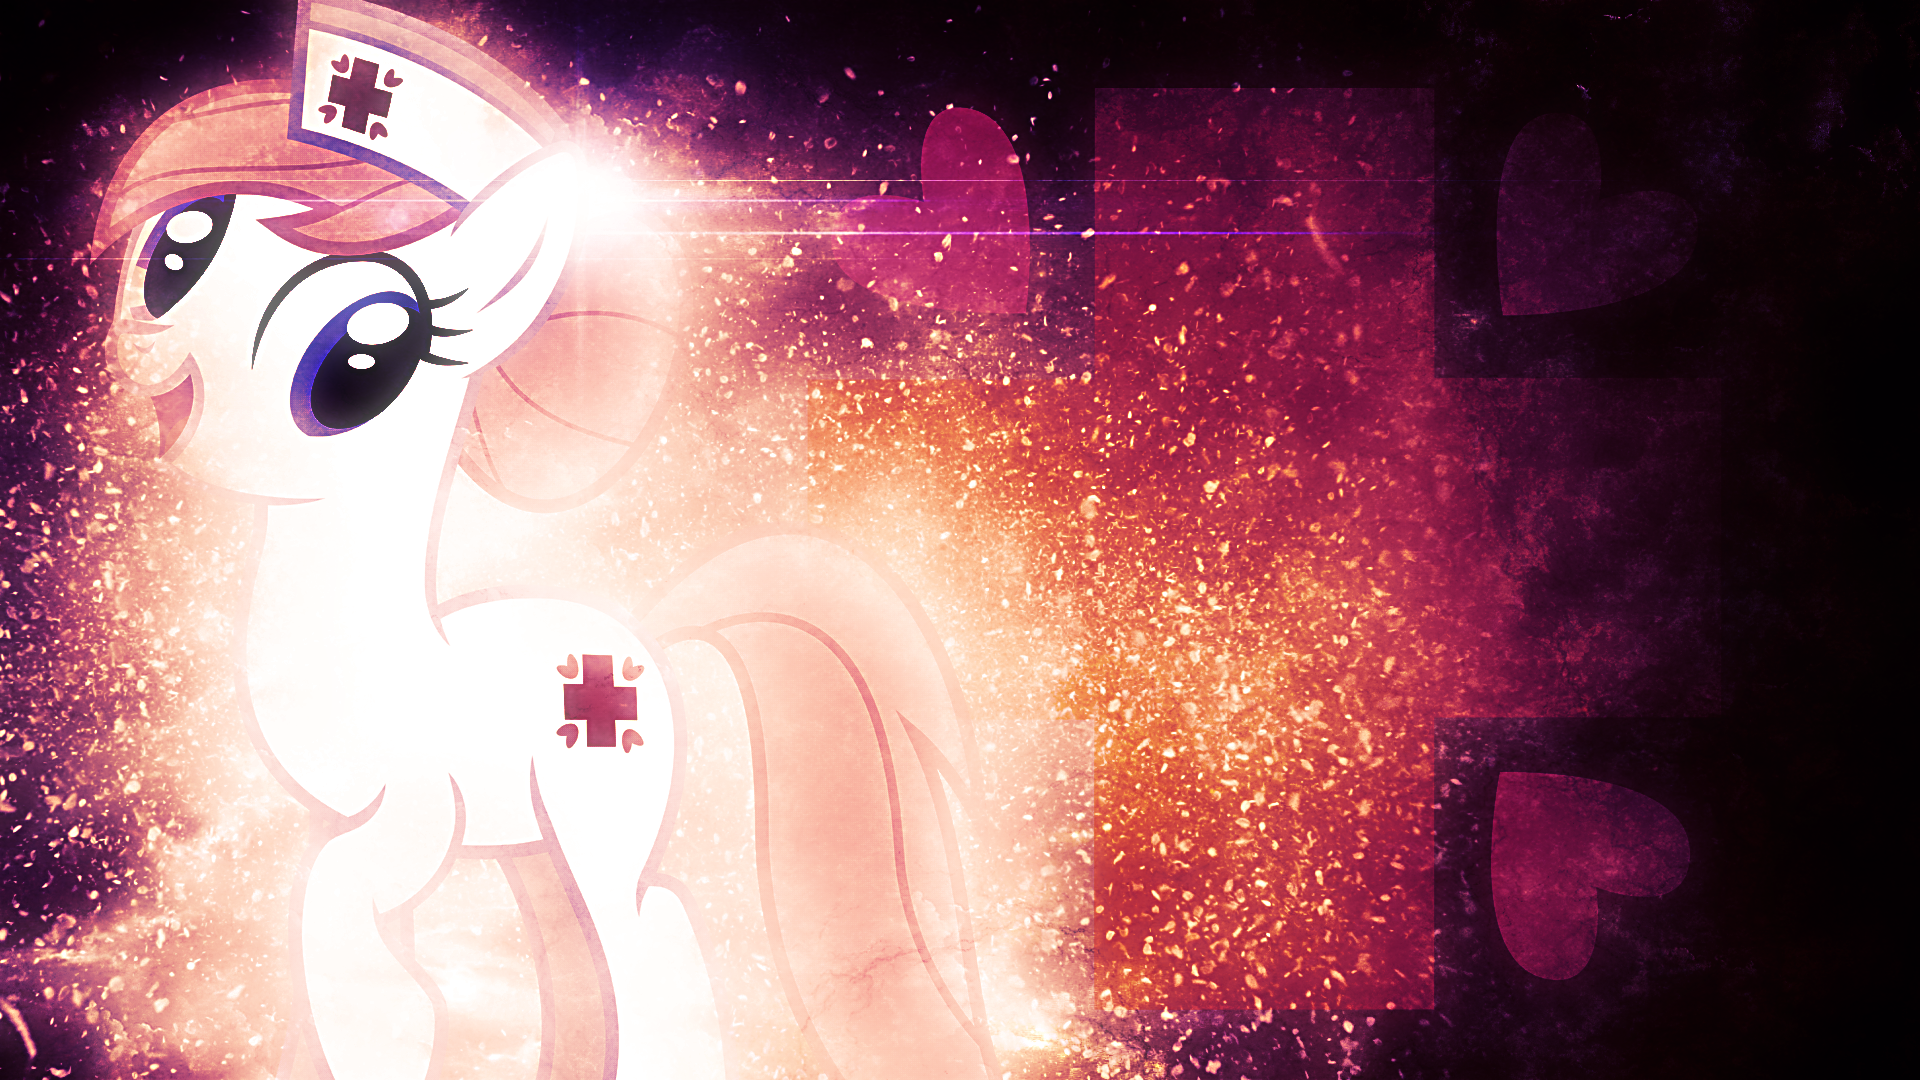 Nurse Redheart - Wallpaper by DrFatalChunk, The-Smiling-Pony and Tzolkine